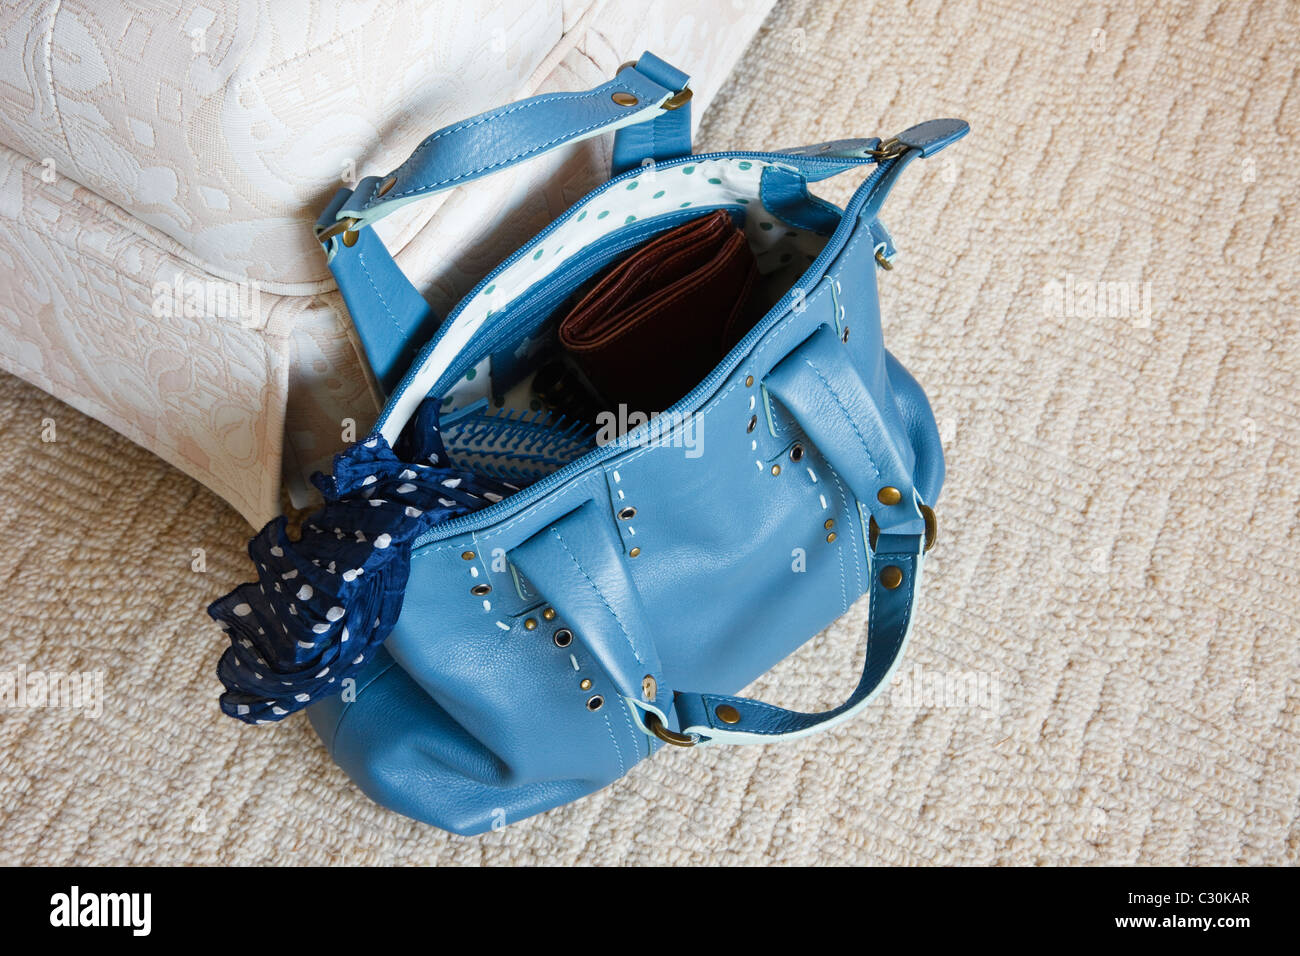 Women's blue leather handbag with zip open showing contents on the floor carpet beside a chair Stock Photo